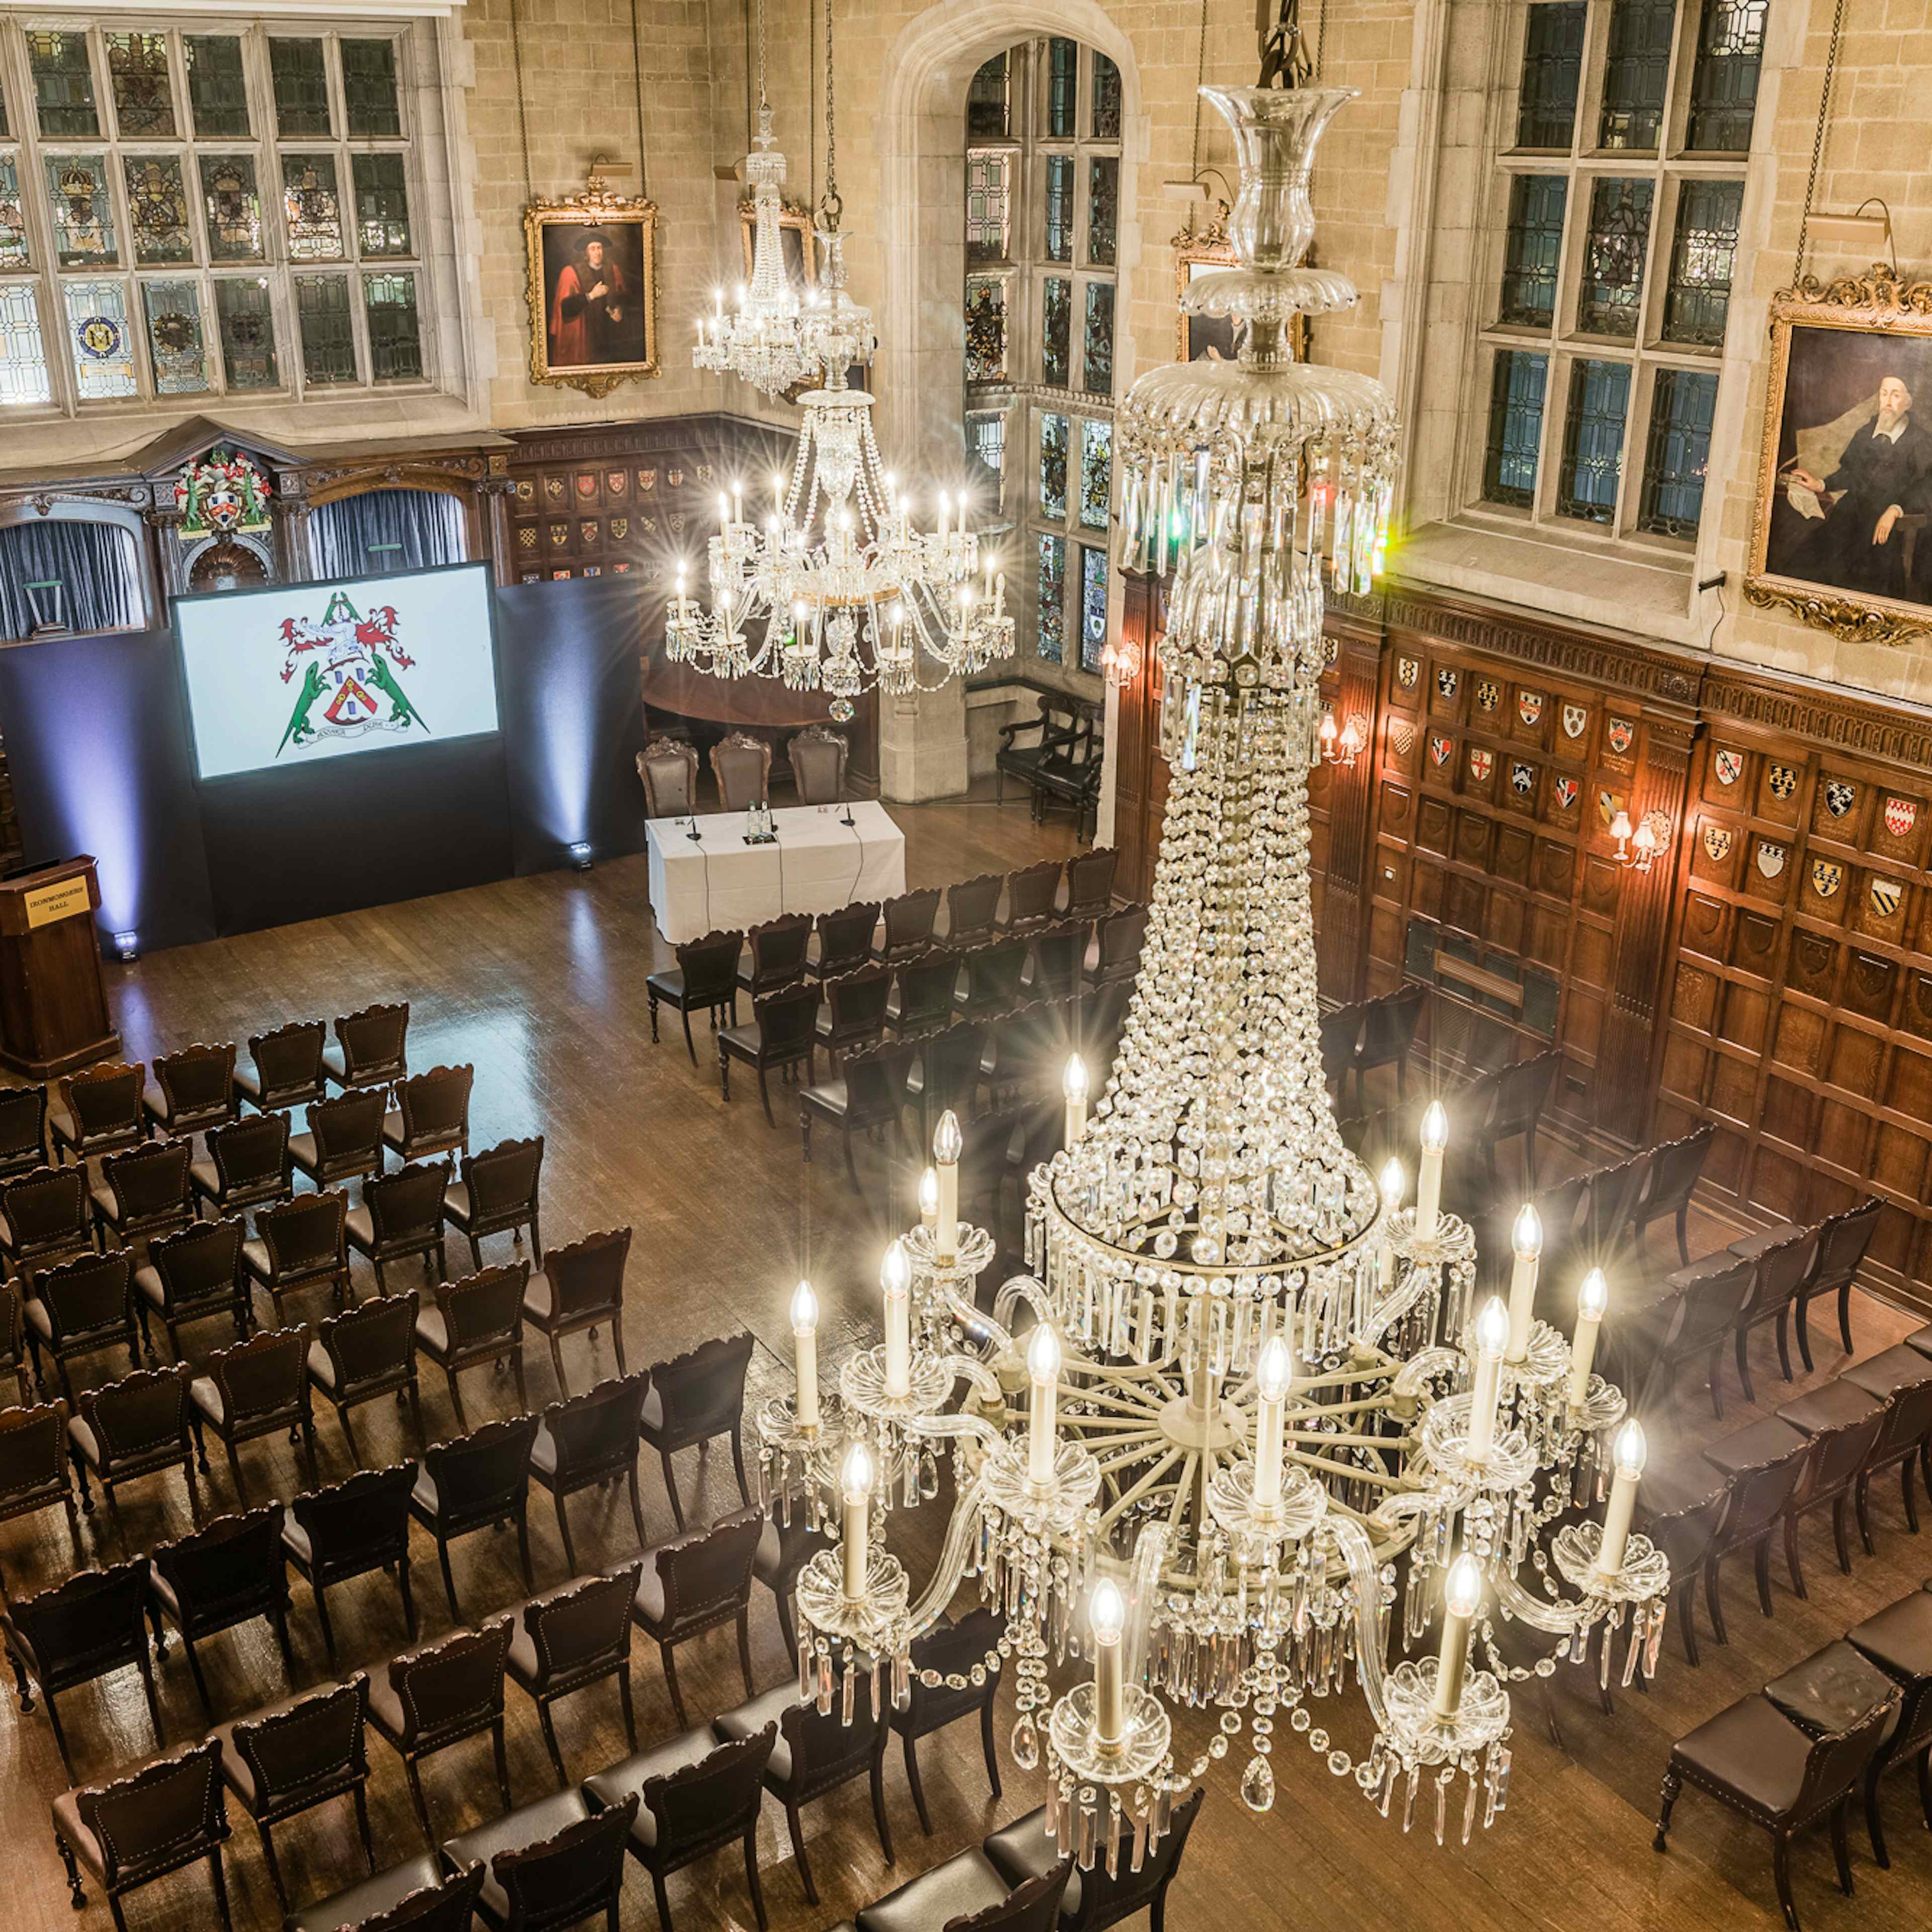 Ironmongers' Hall - The Banqueting Hall and The Drawing Room image 3